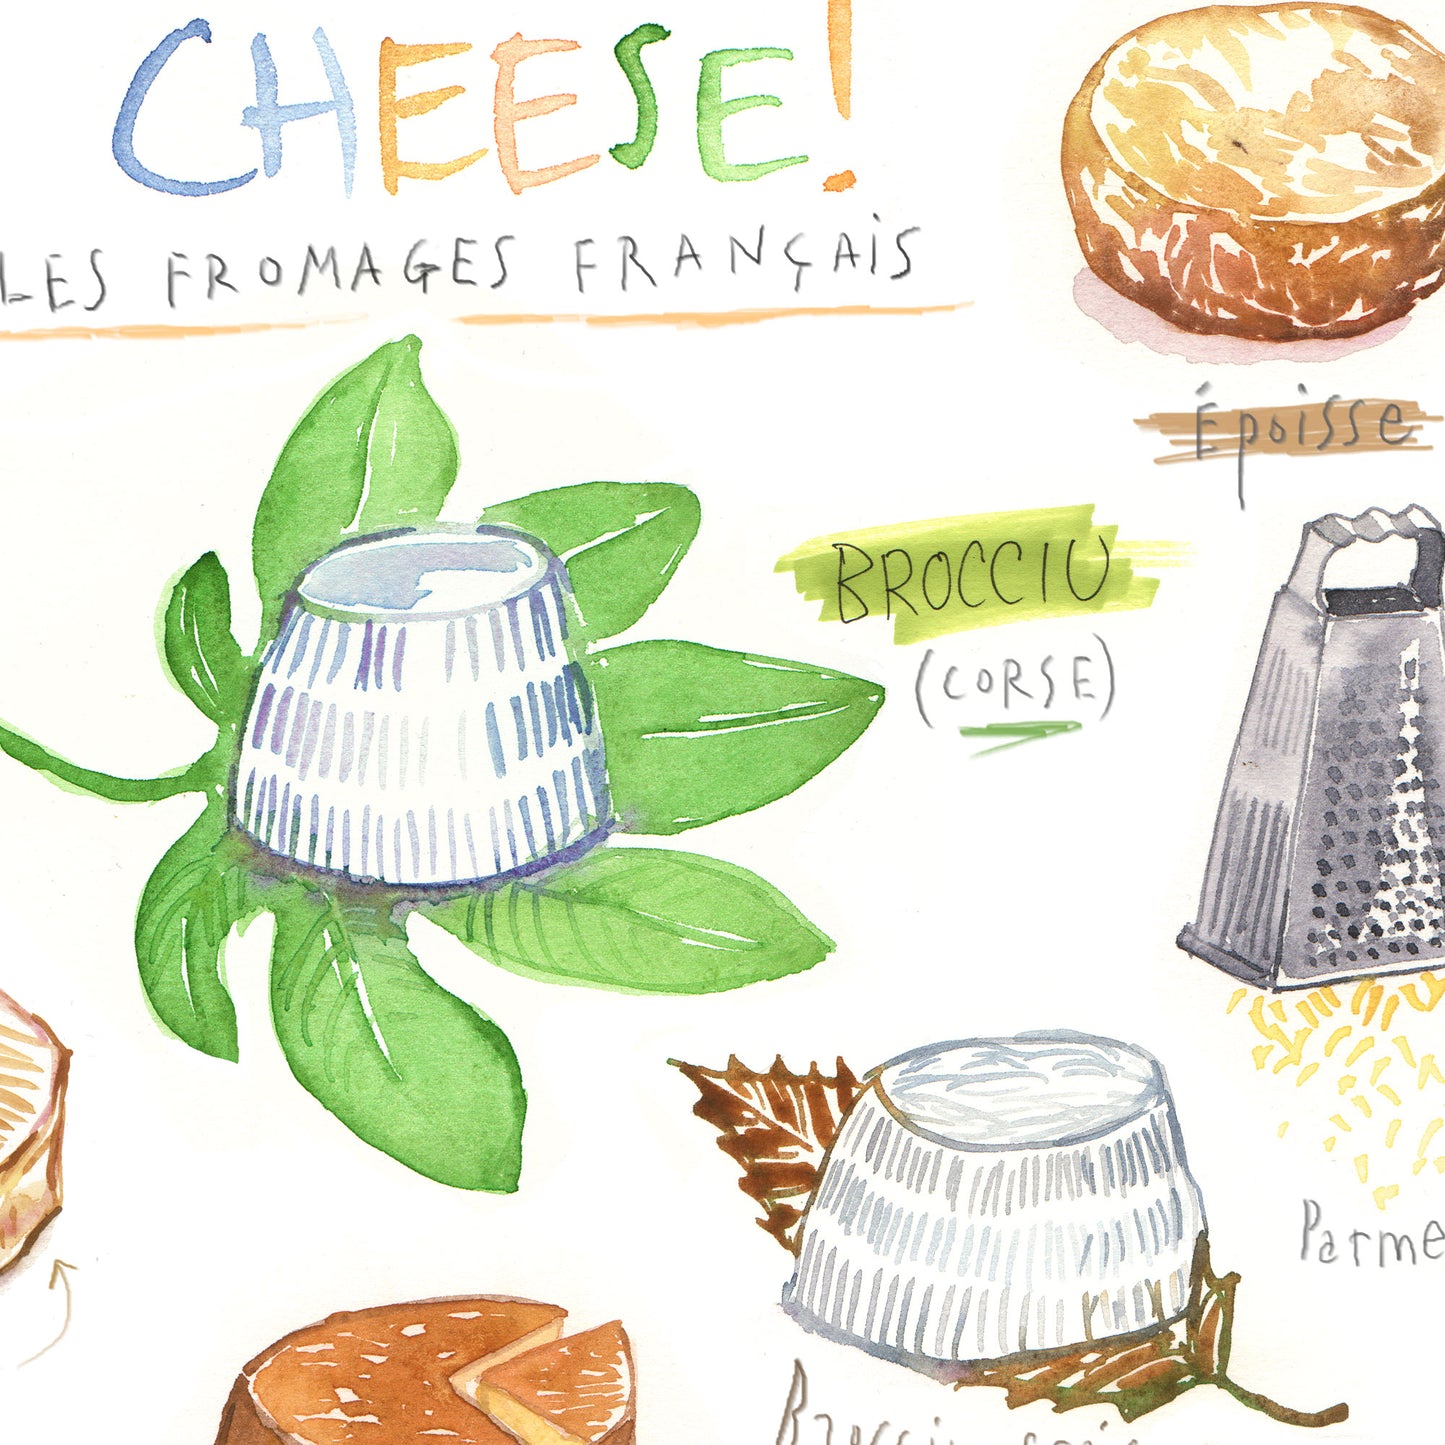 French cheese #2 - Les fromages français